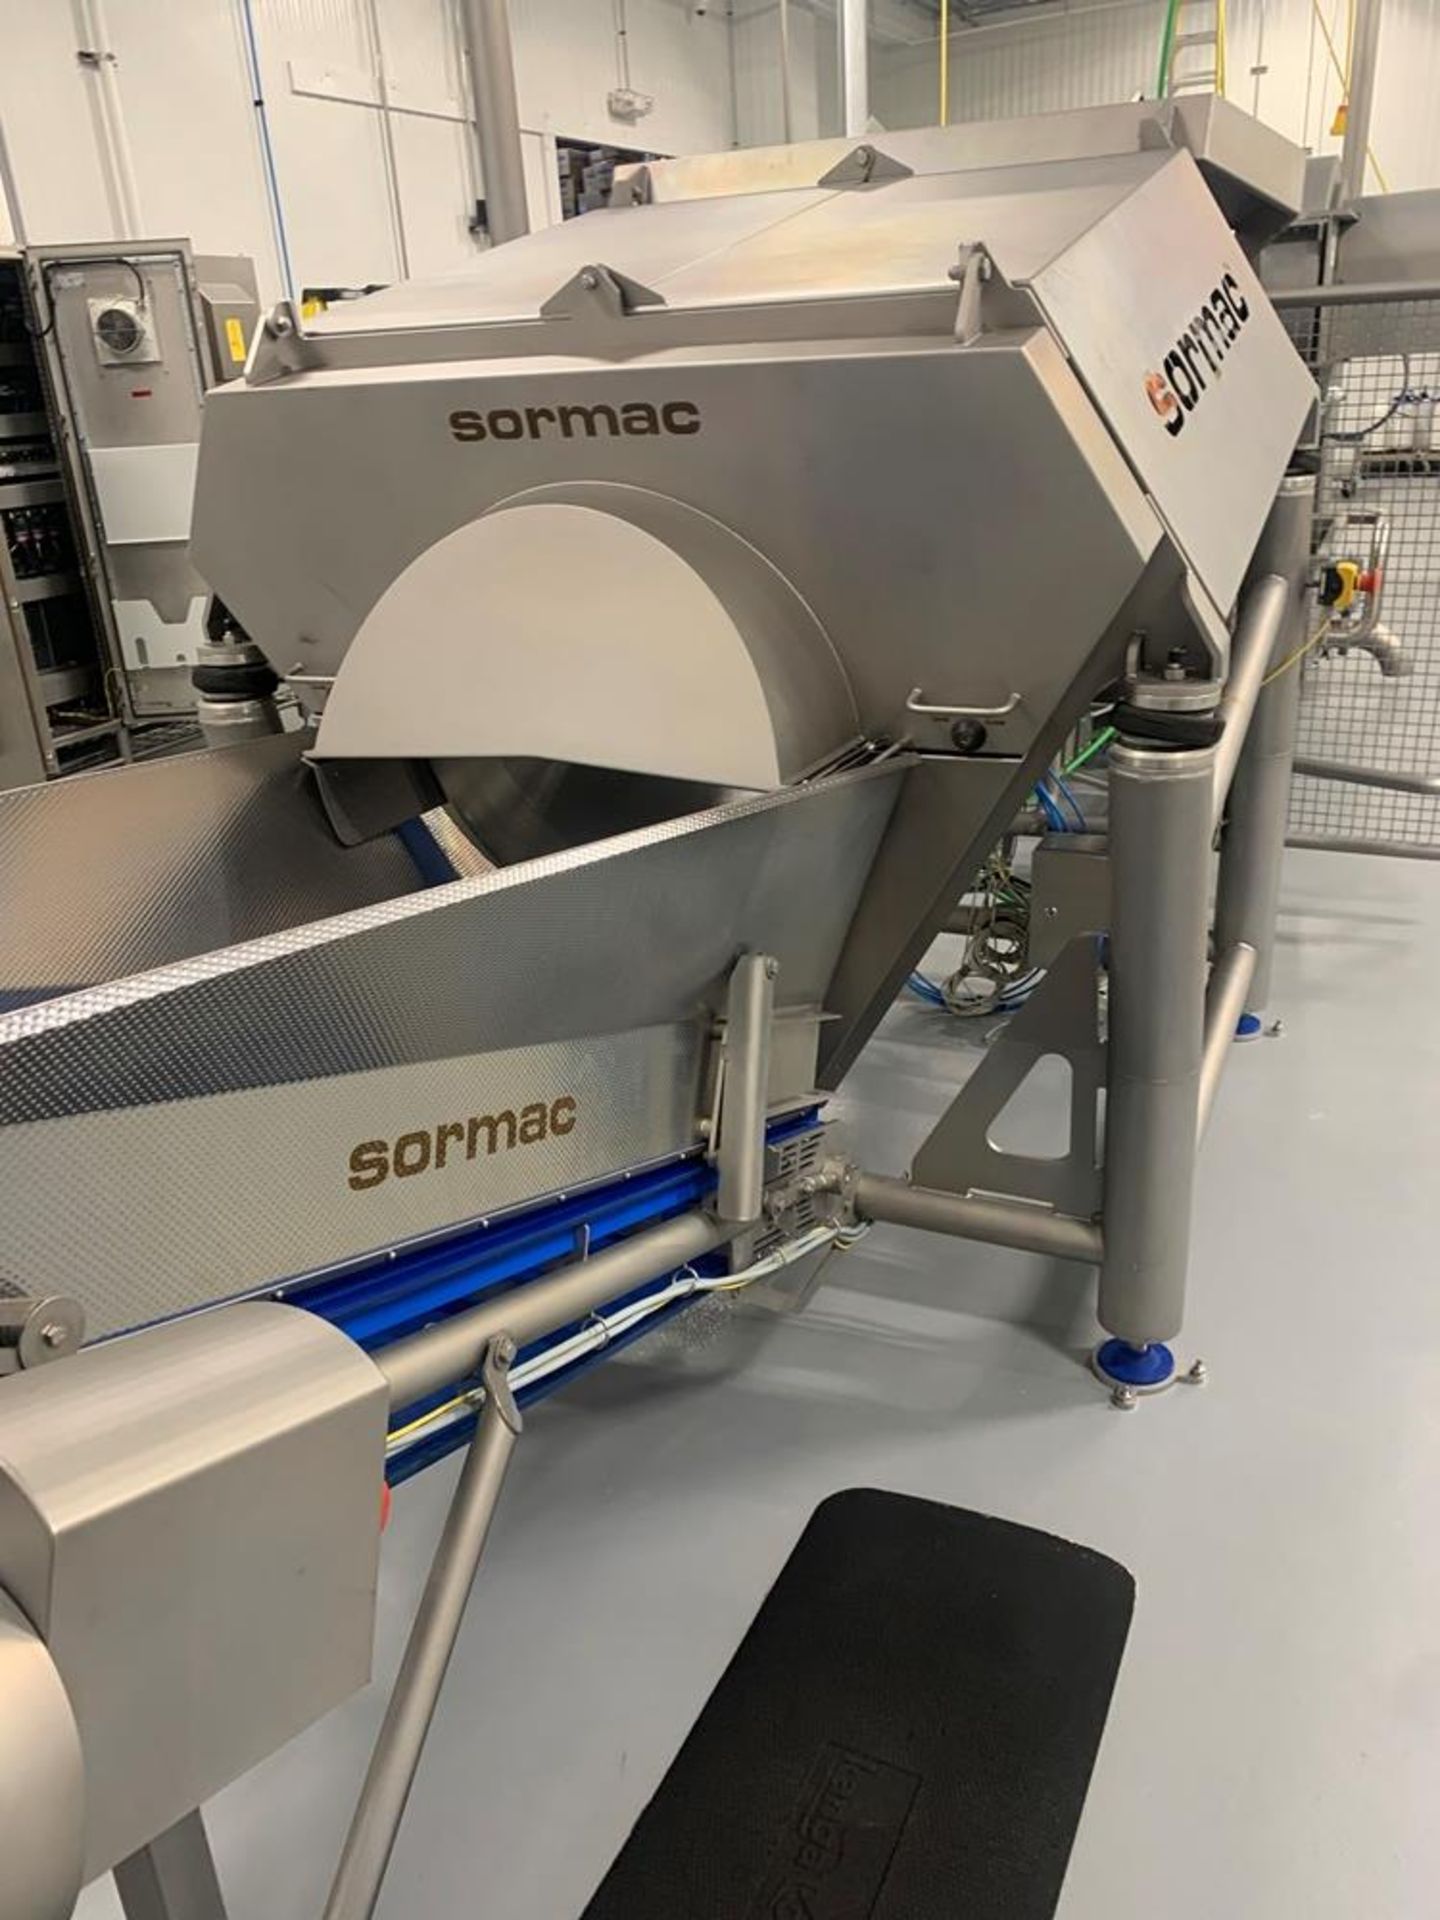 Sormac Cleaning and Drying System, Sormac Mdl. 180950/10S-PS 70/50/010 Washing System , Mfg. 2018, - Image 7 of 41